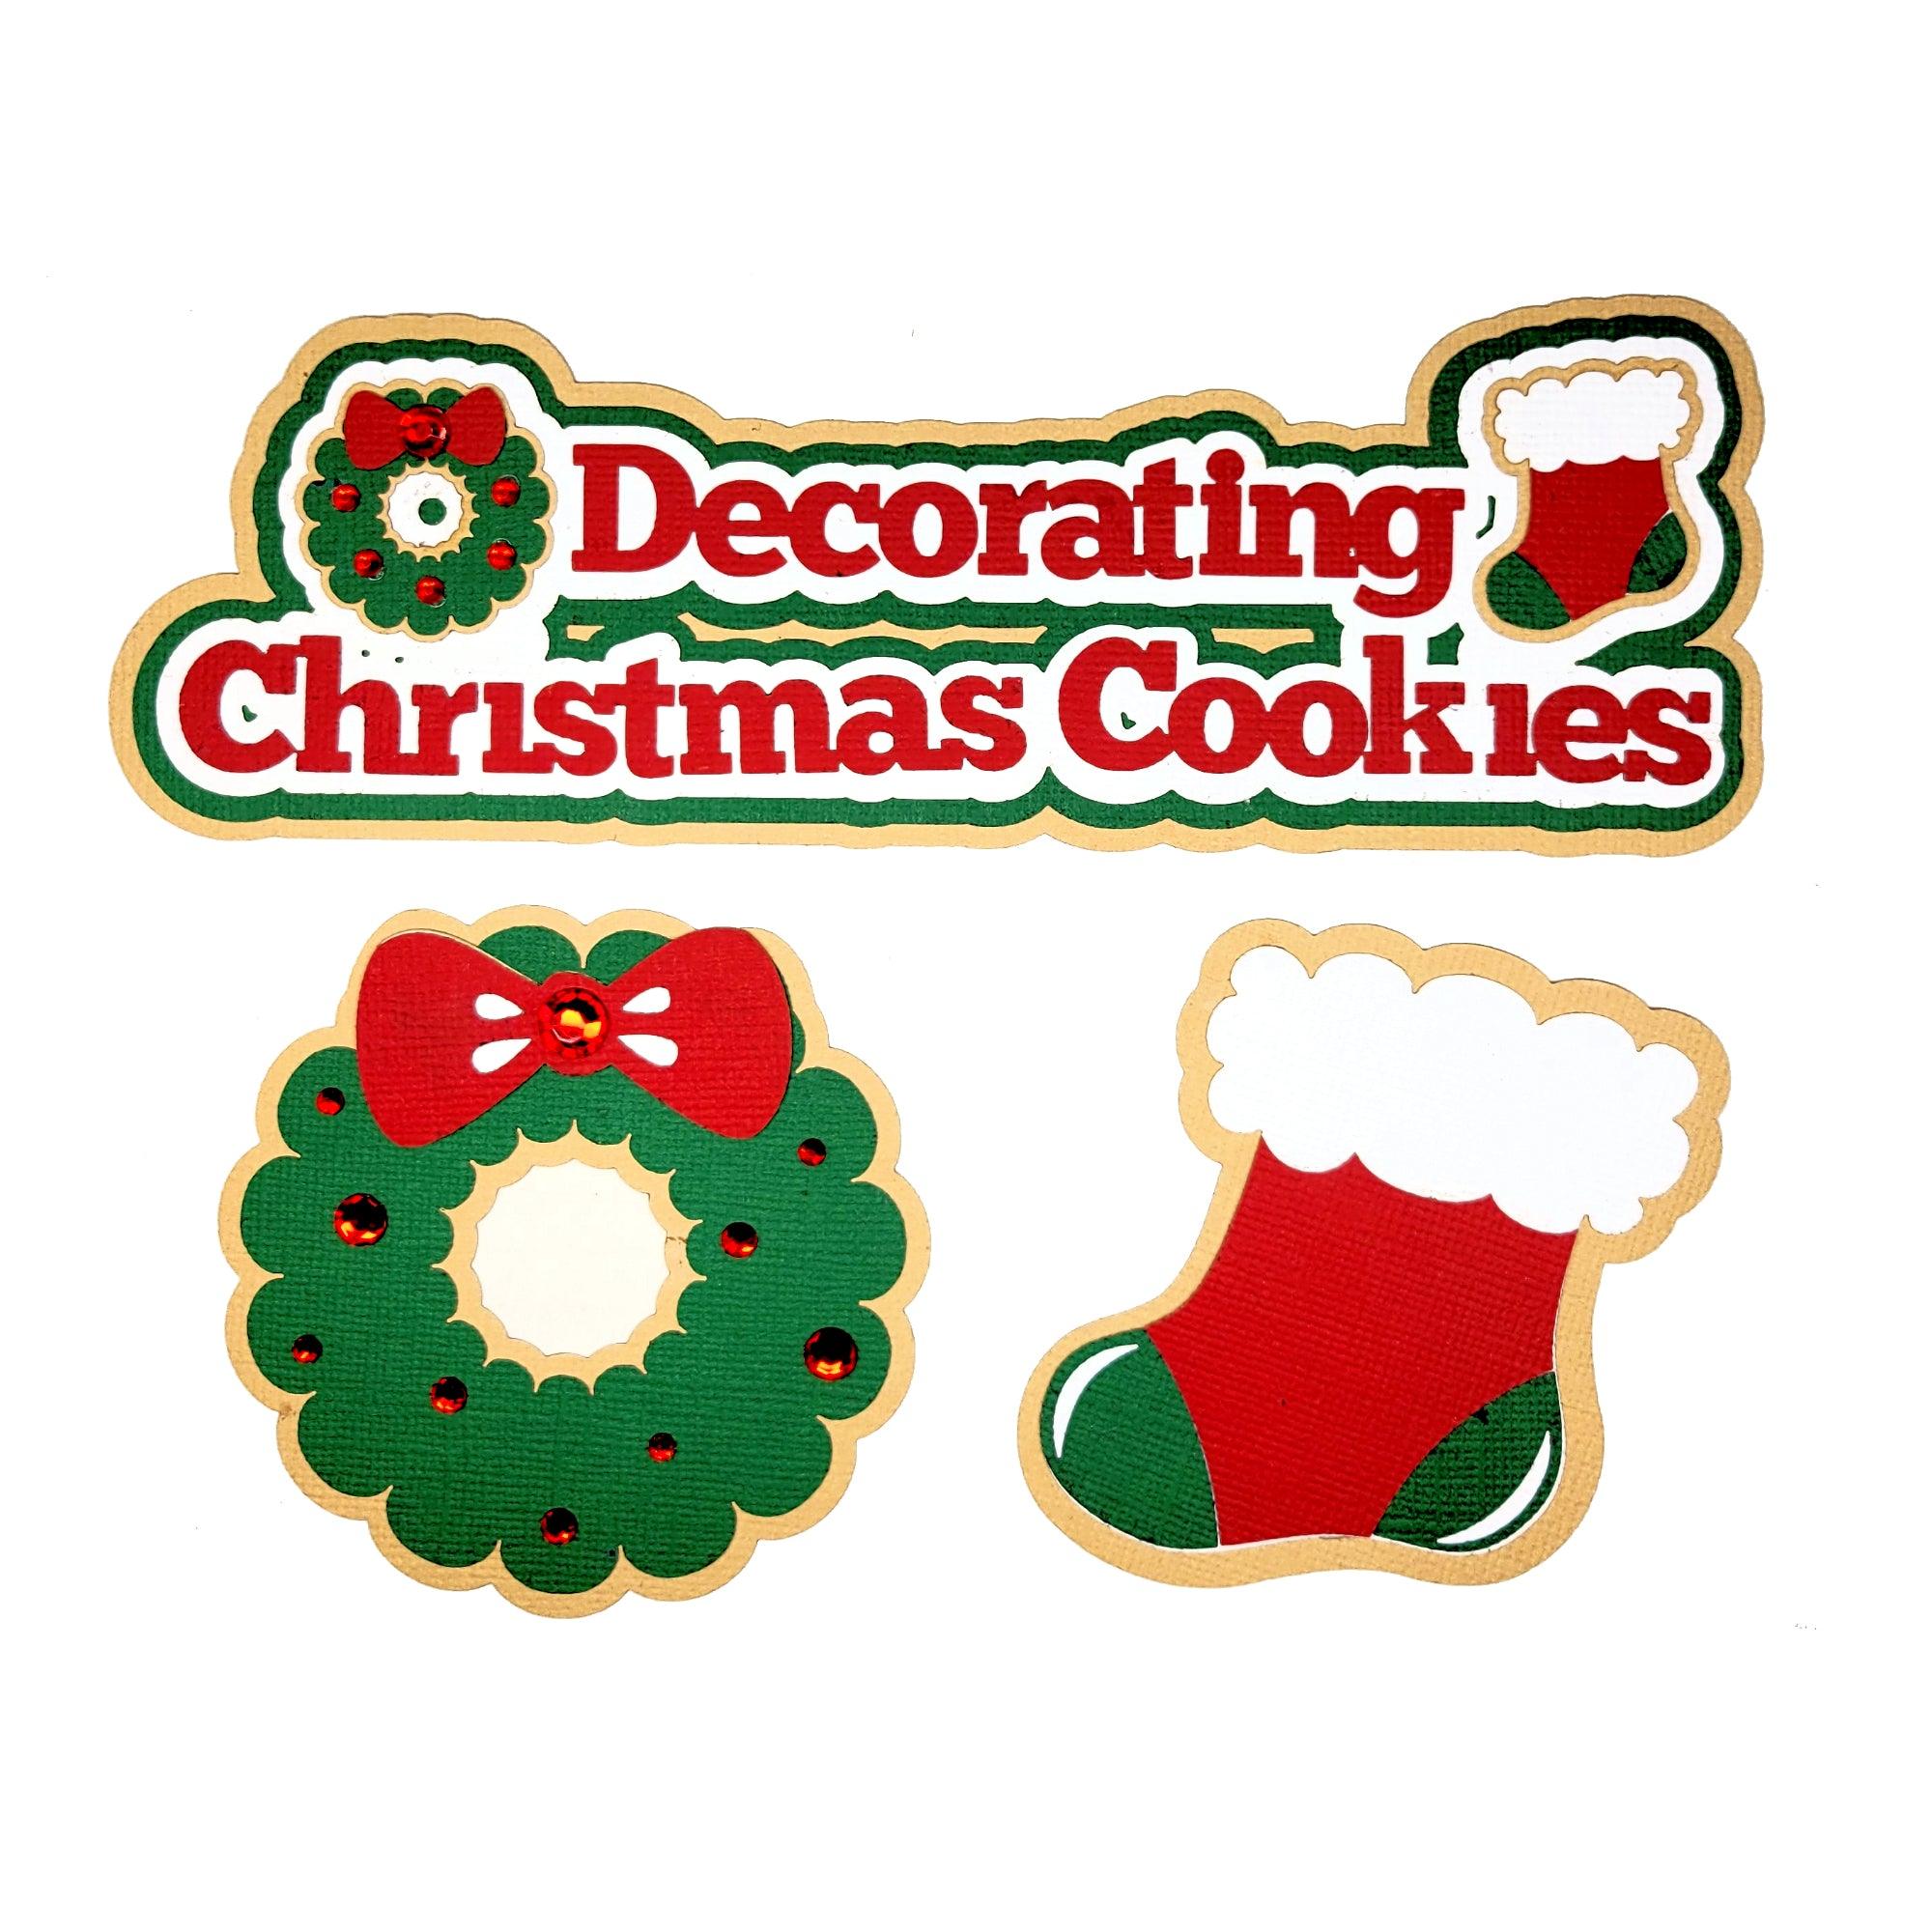 Decorating Christmas Cookies for Santa 3-Piece Set Fully-Assembled Laser Cut Scrapbook Embellishment by SSC Laser Designs